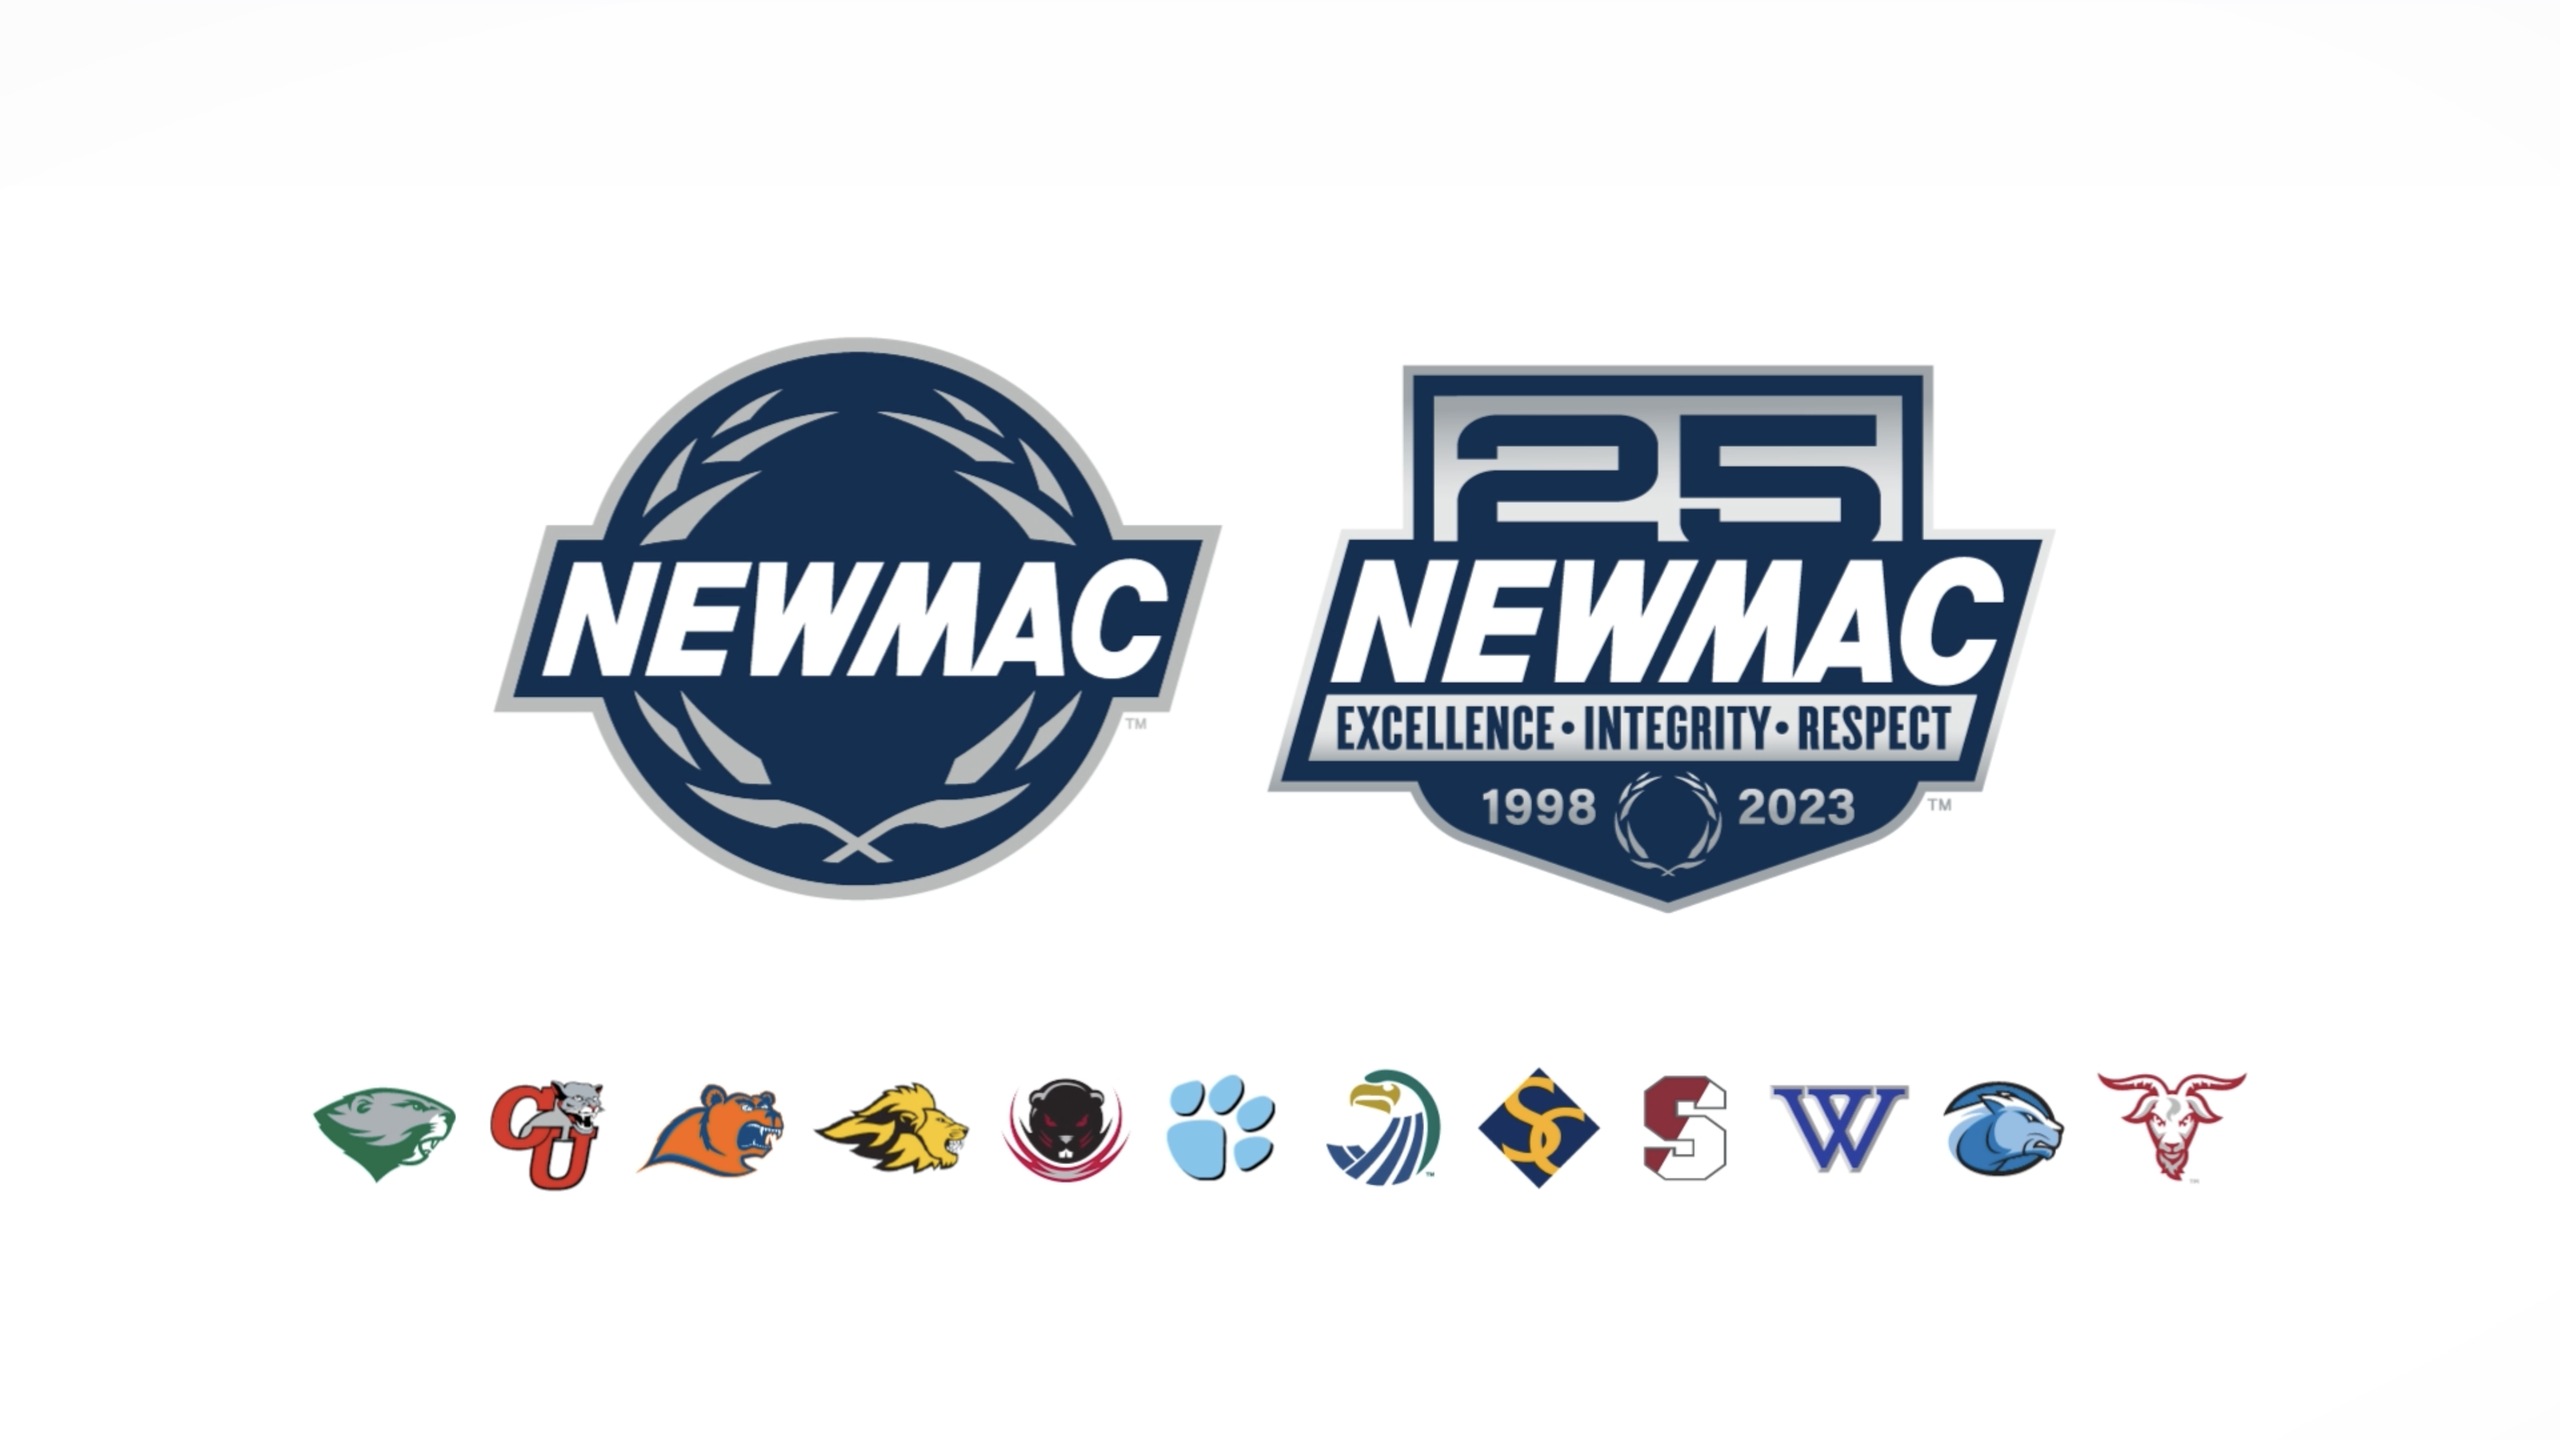 Salve Regina University will join the New England Women's and Men's Athletic Conference (NEWMAC) as its newest member institution following unanimous support from the NEWMAC Presidents Council. Salve Regina will become the conference's 12th core member effective July 1, 2023 and will begin participating in conference play during the 2023-2024 academic year.